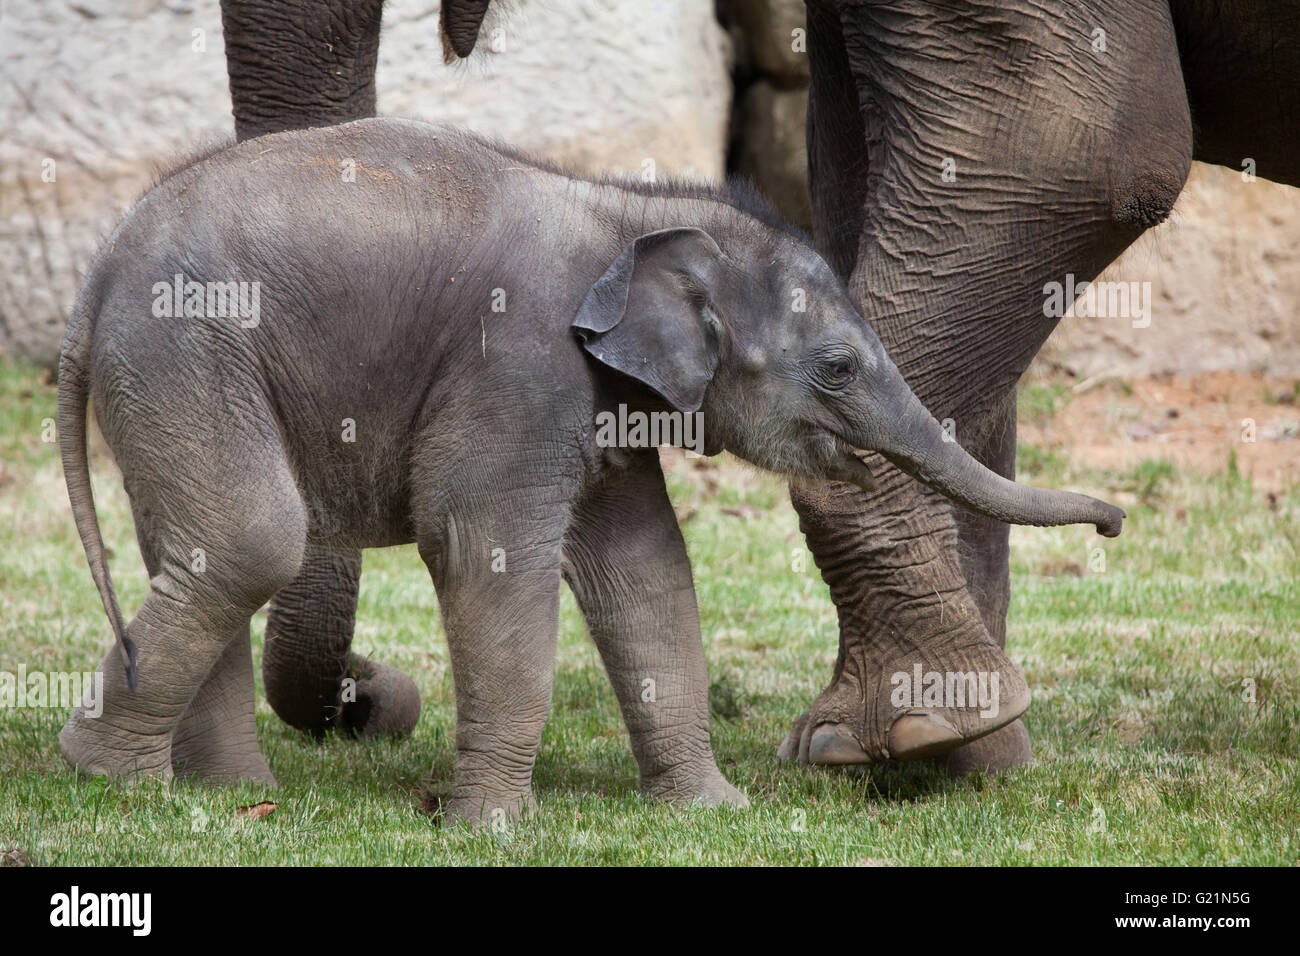 One-month-old Indian elephant (Elephas maximus indicus) named Maxmilian with its mother Janita at Prague Zoo, Czech Republic. Stock Photo